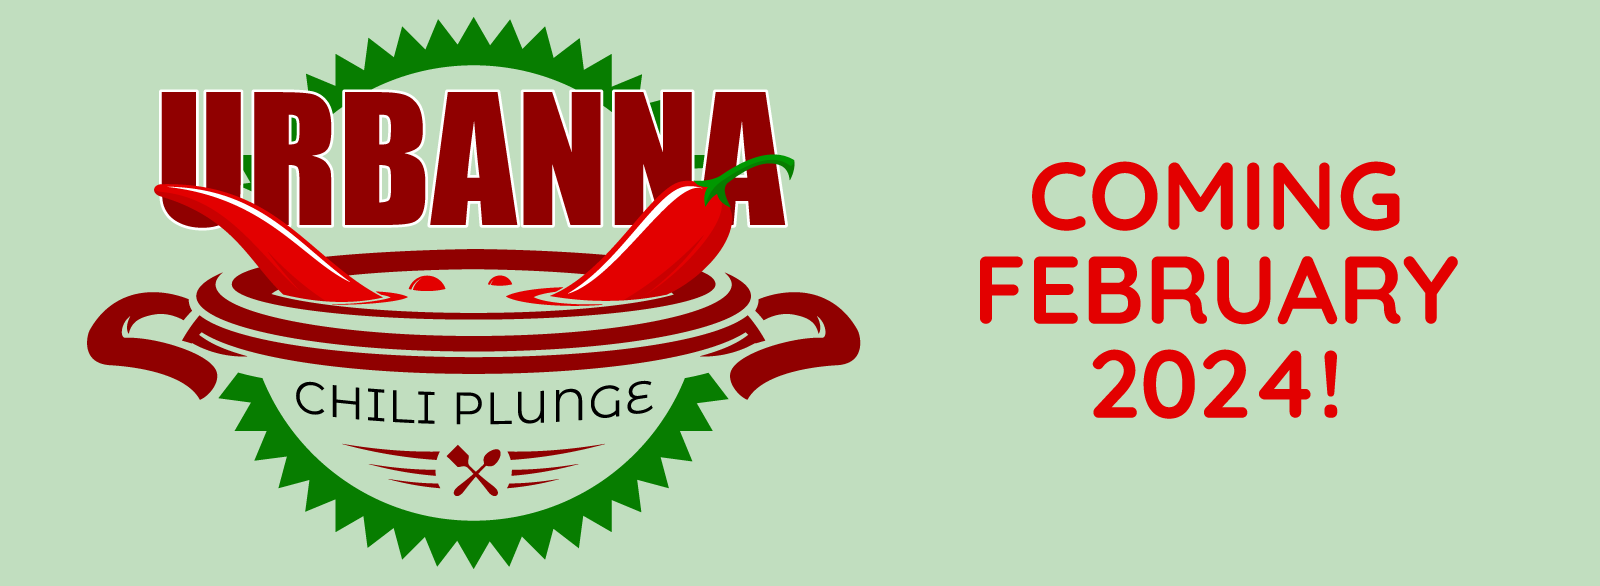 9233-chili-plunge-banner.png